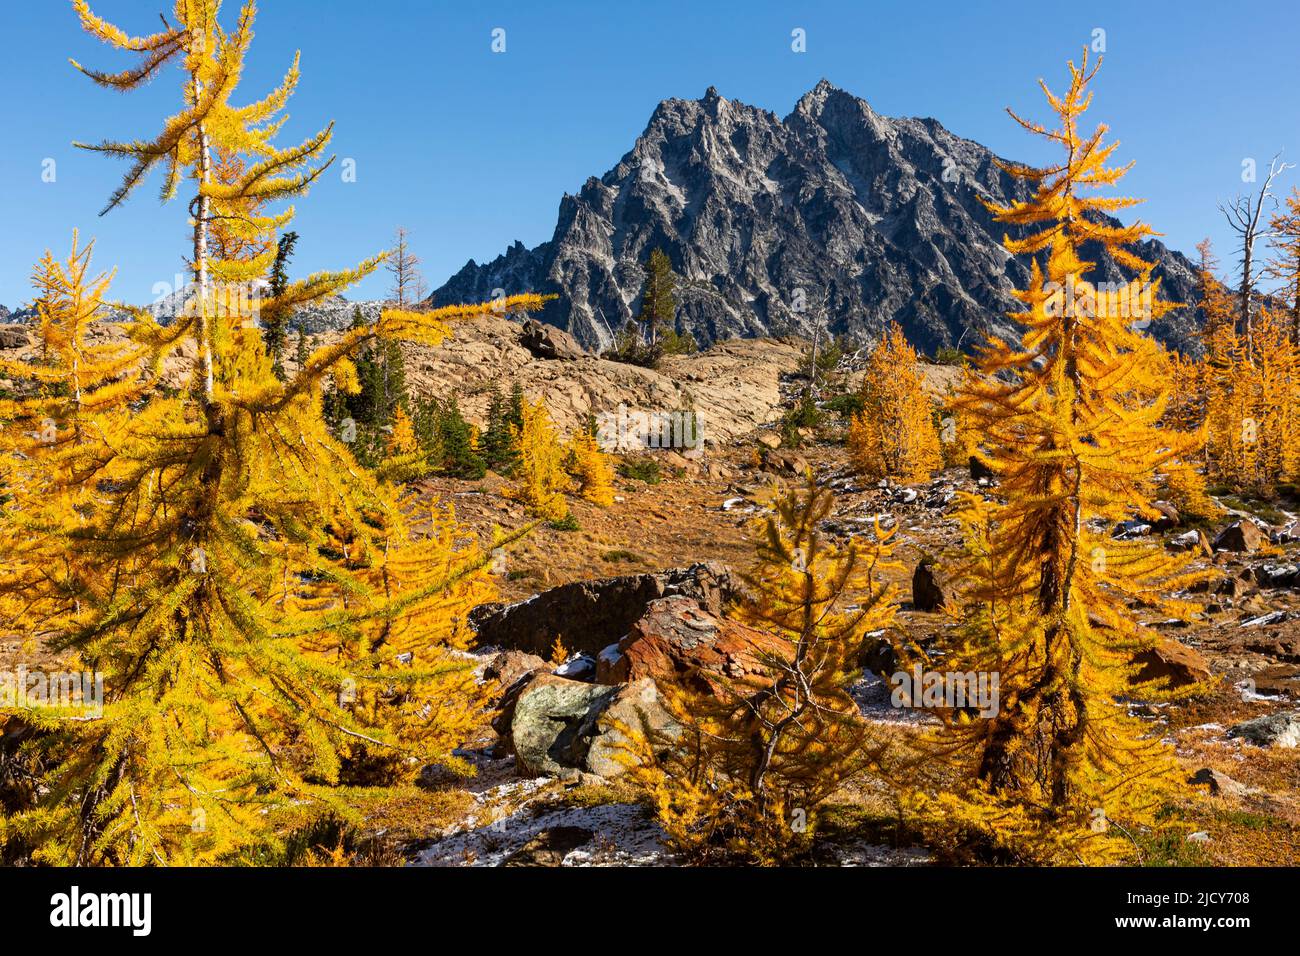 WA21679-00...WASHINGTON - Alpine larch trees and Mount Stuart from Ingall Way in the Alpine Lakes Wilderness area. Stock Photo